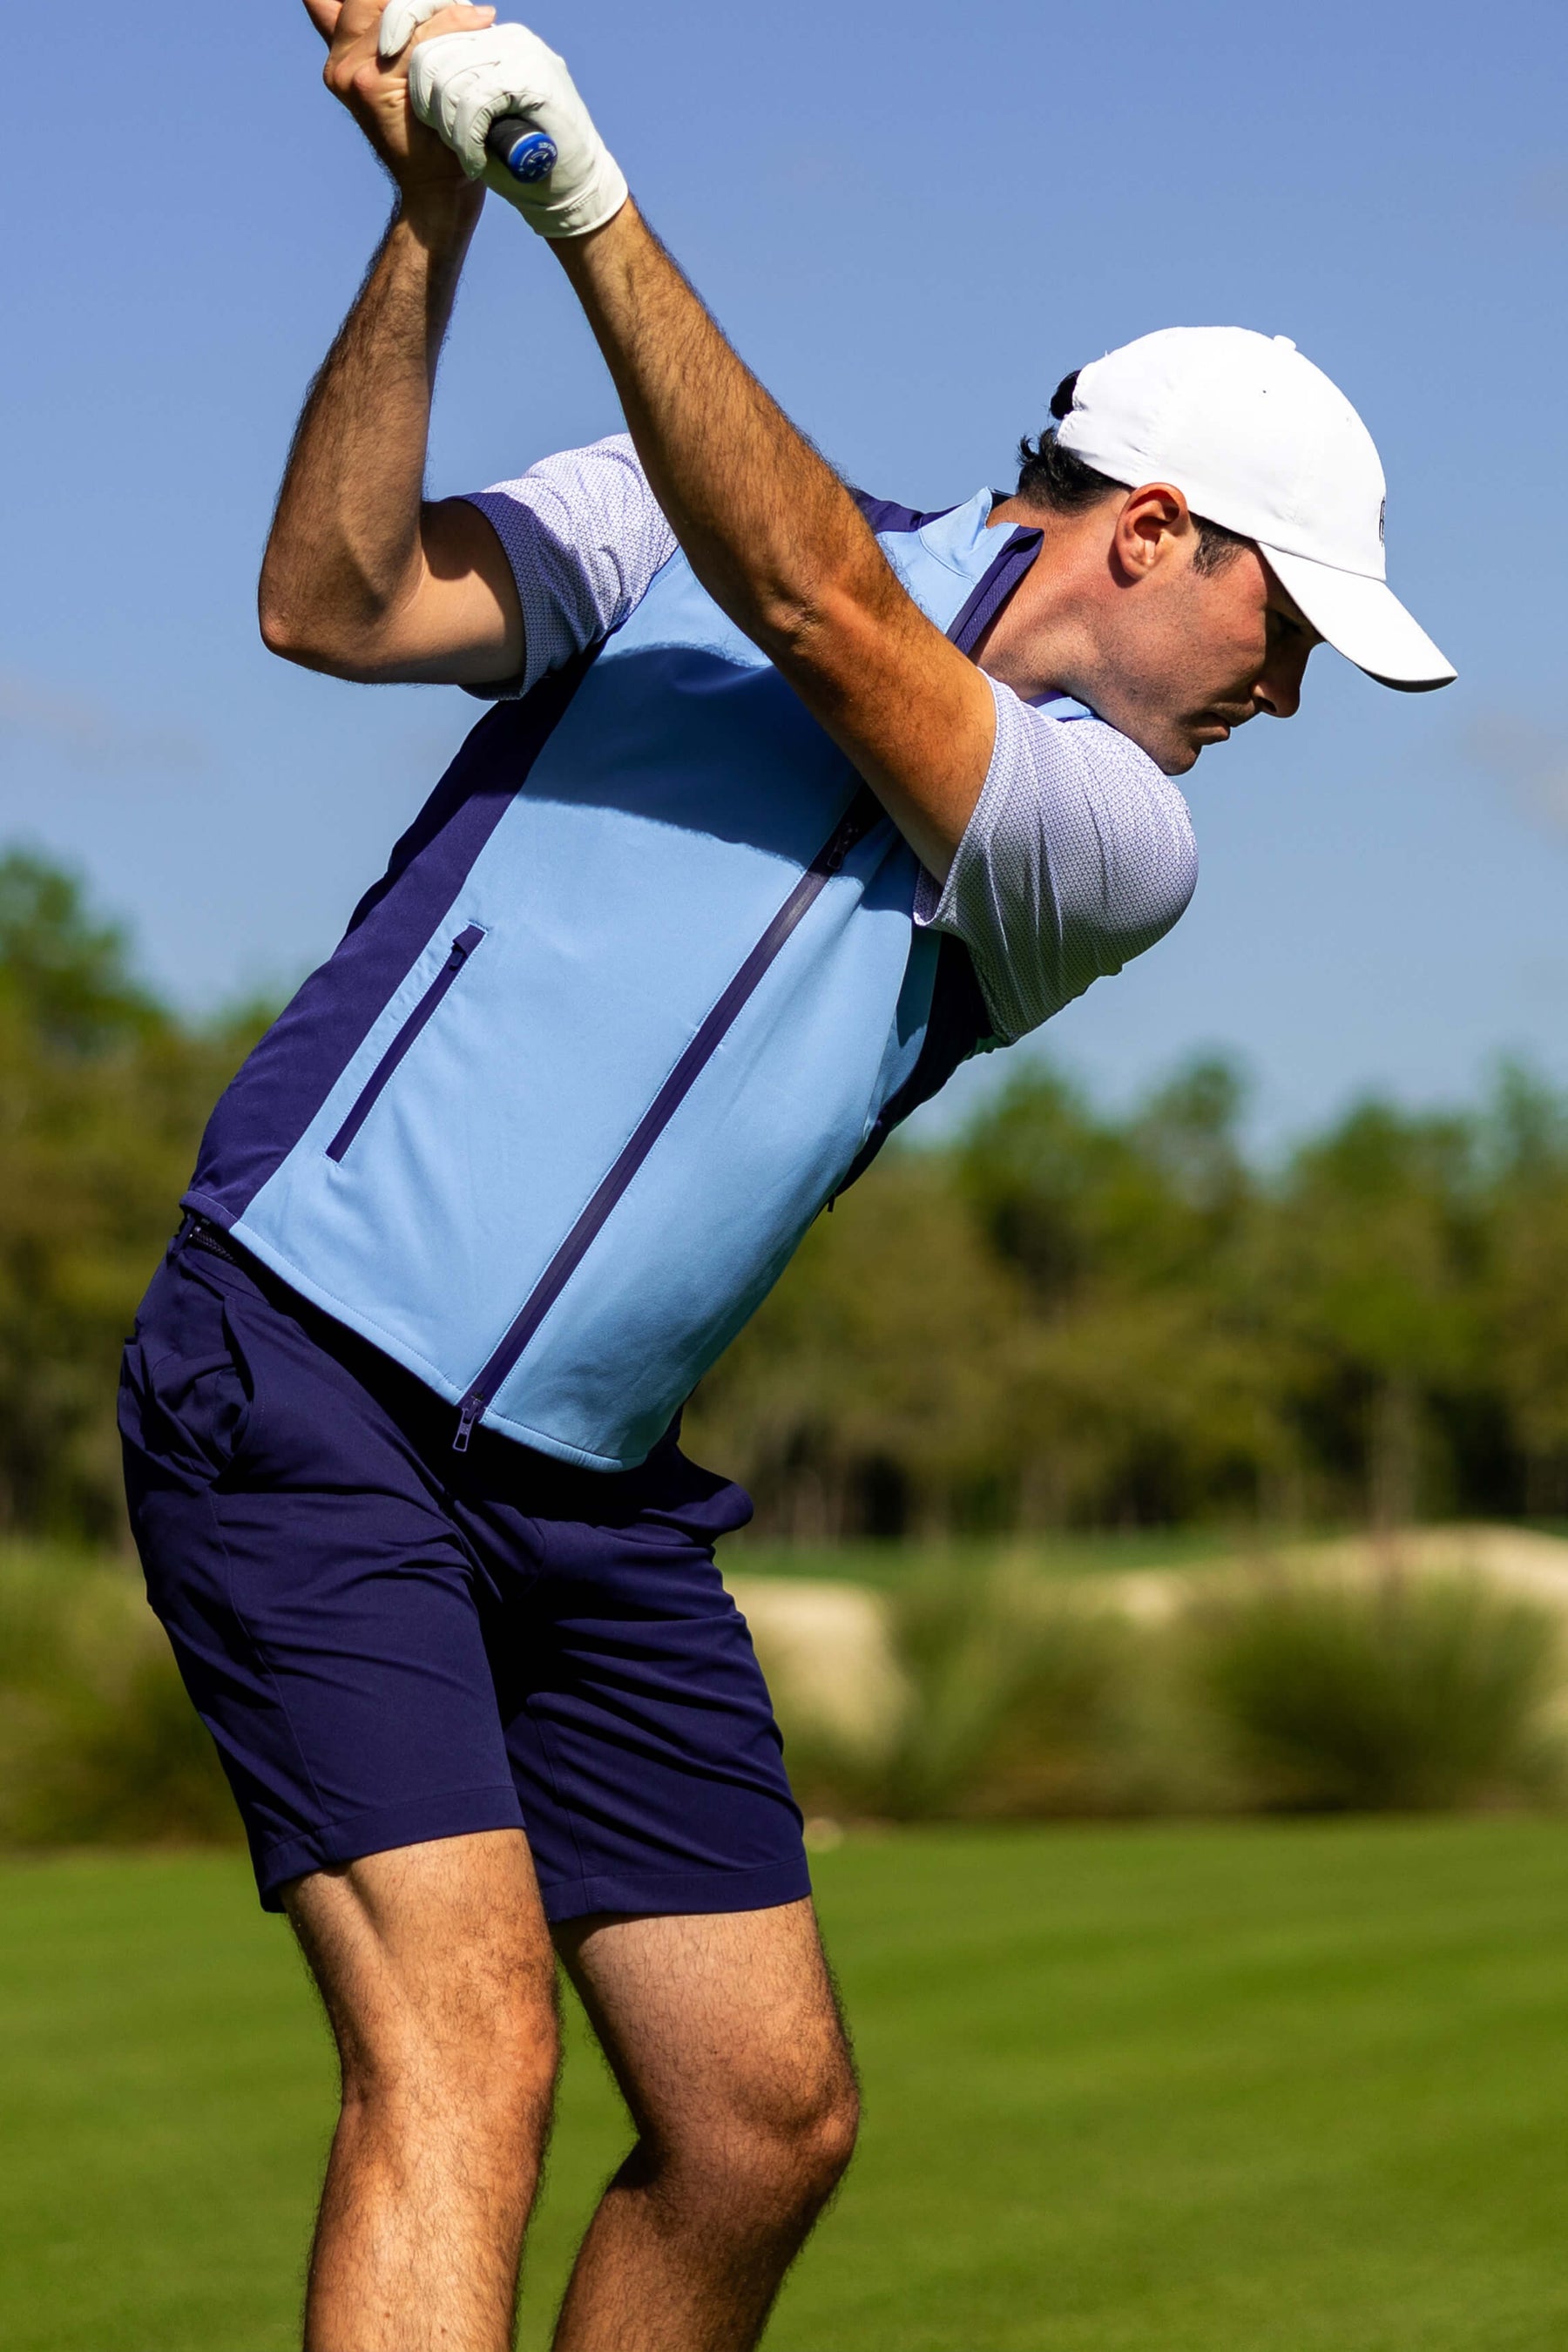 Golfer wearing Blue Vest and Shorts swinging a club